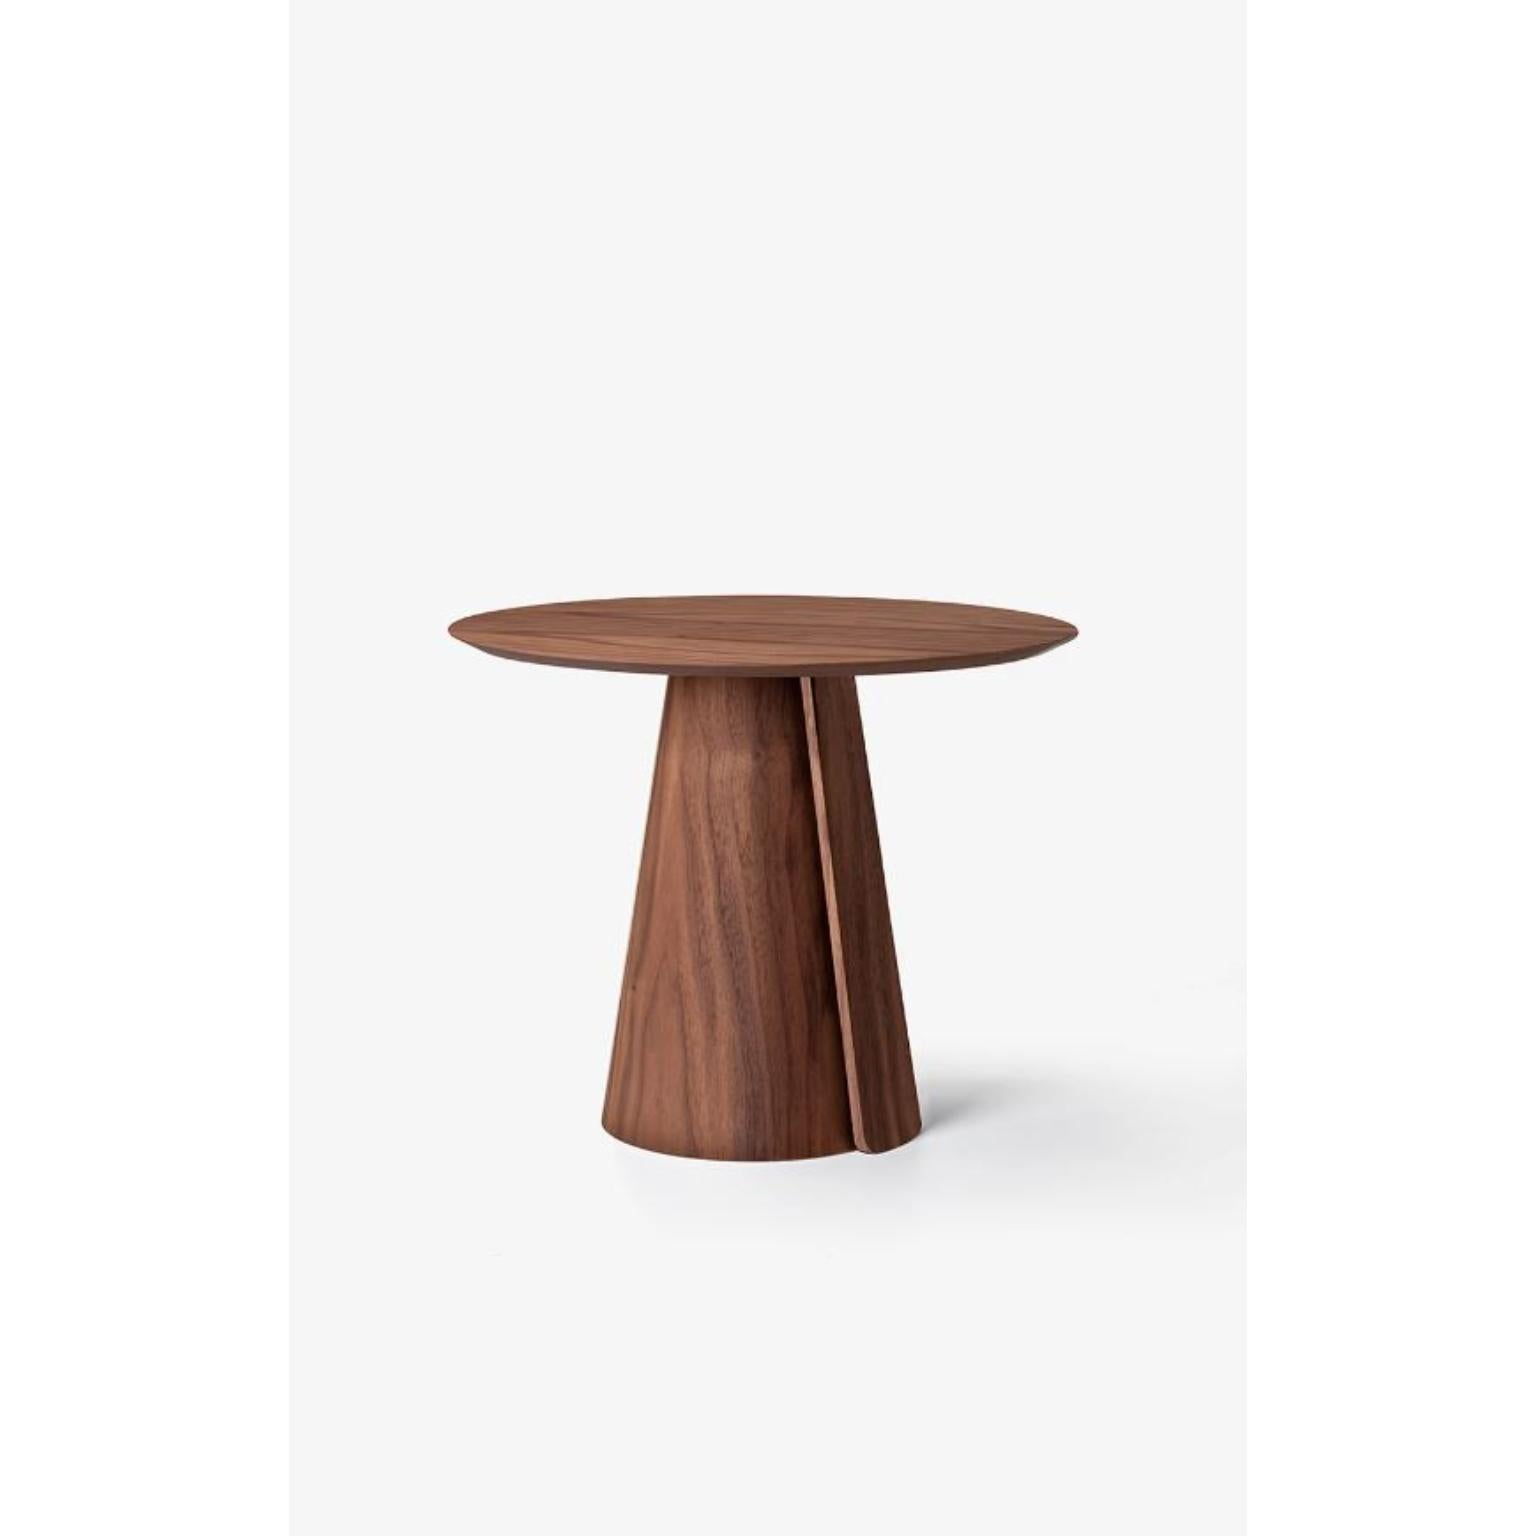 Volta Dining Table 180 by Wentz
Dimensions: D 180 x W 180 x H 75 cm
Materials: Wood, Plywood, MDF, Natural Wood Veneer, Steel.
Weight: 135kg / 298 lbs

The Volta table references nature in its impermanence. The detail on the base suggests natural